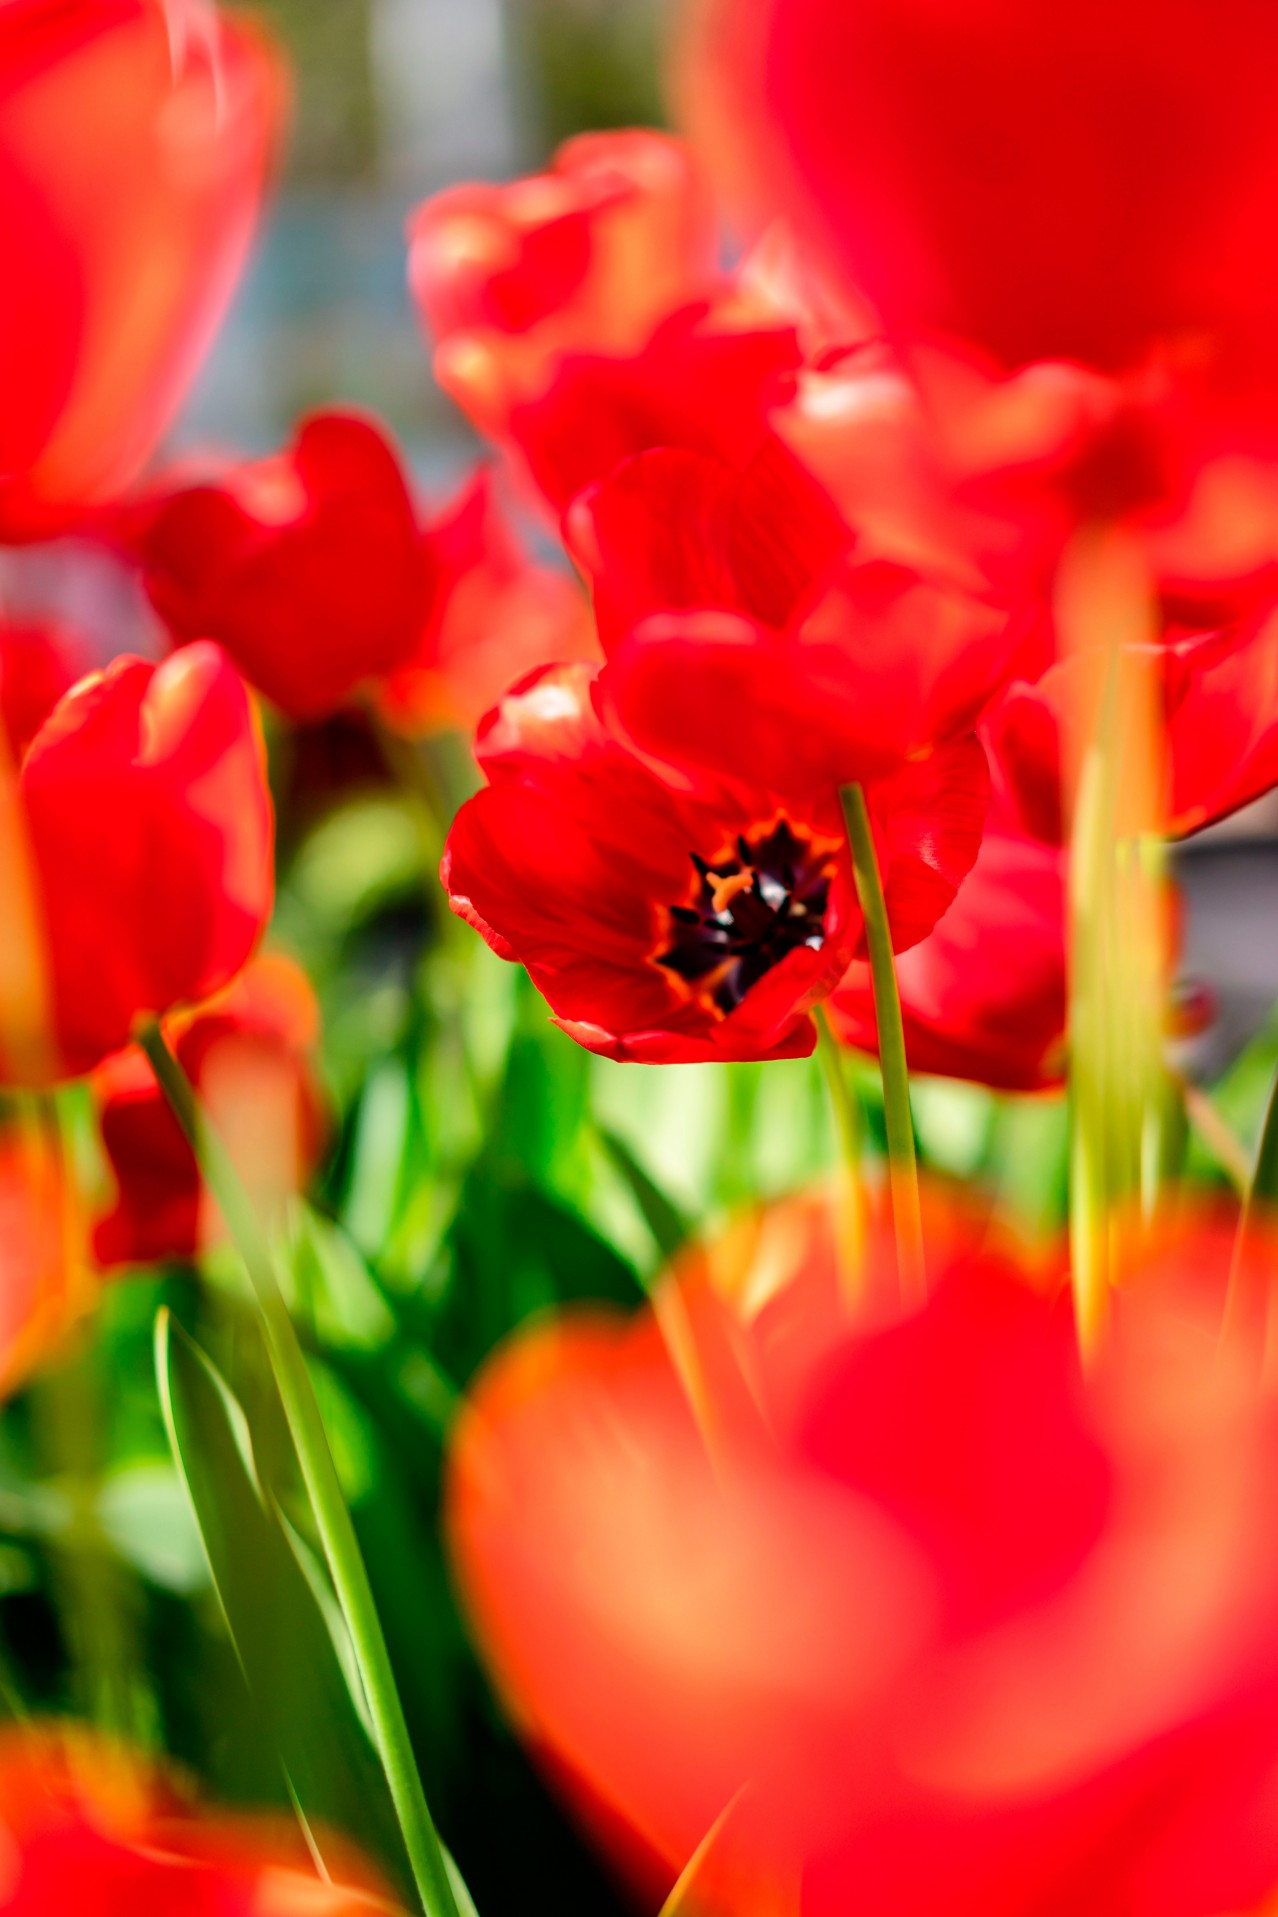 Spring wallpaper with red poppies